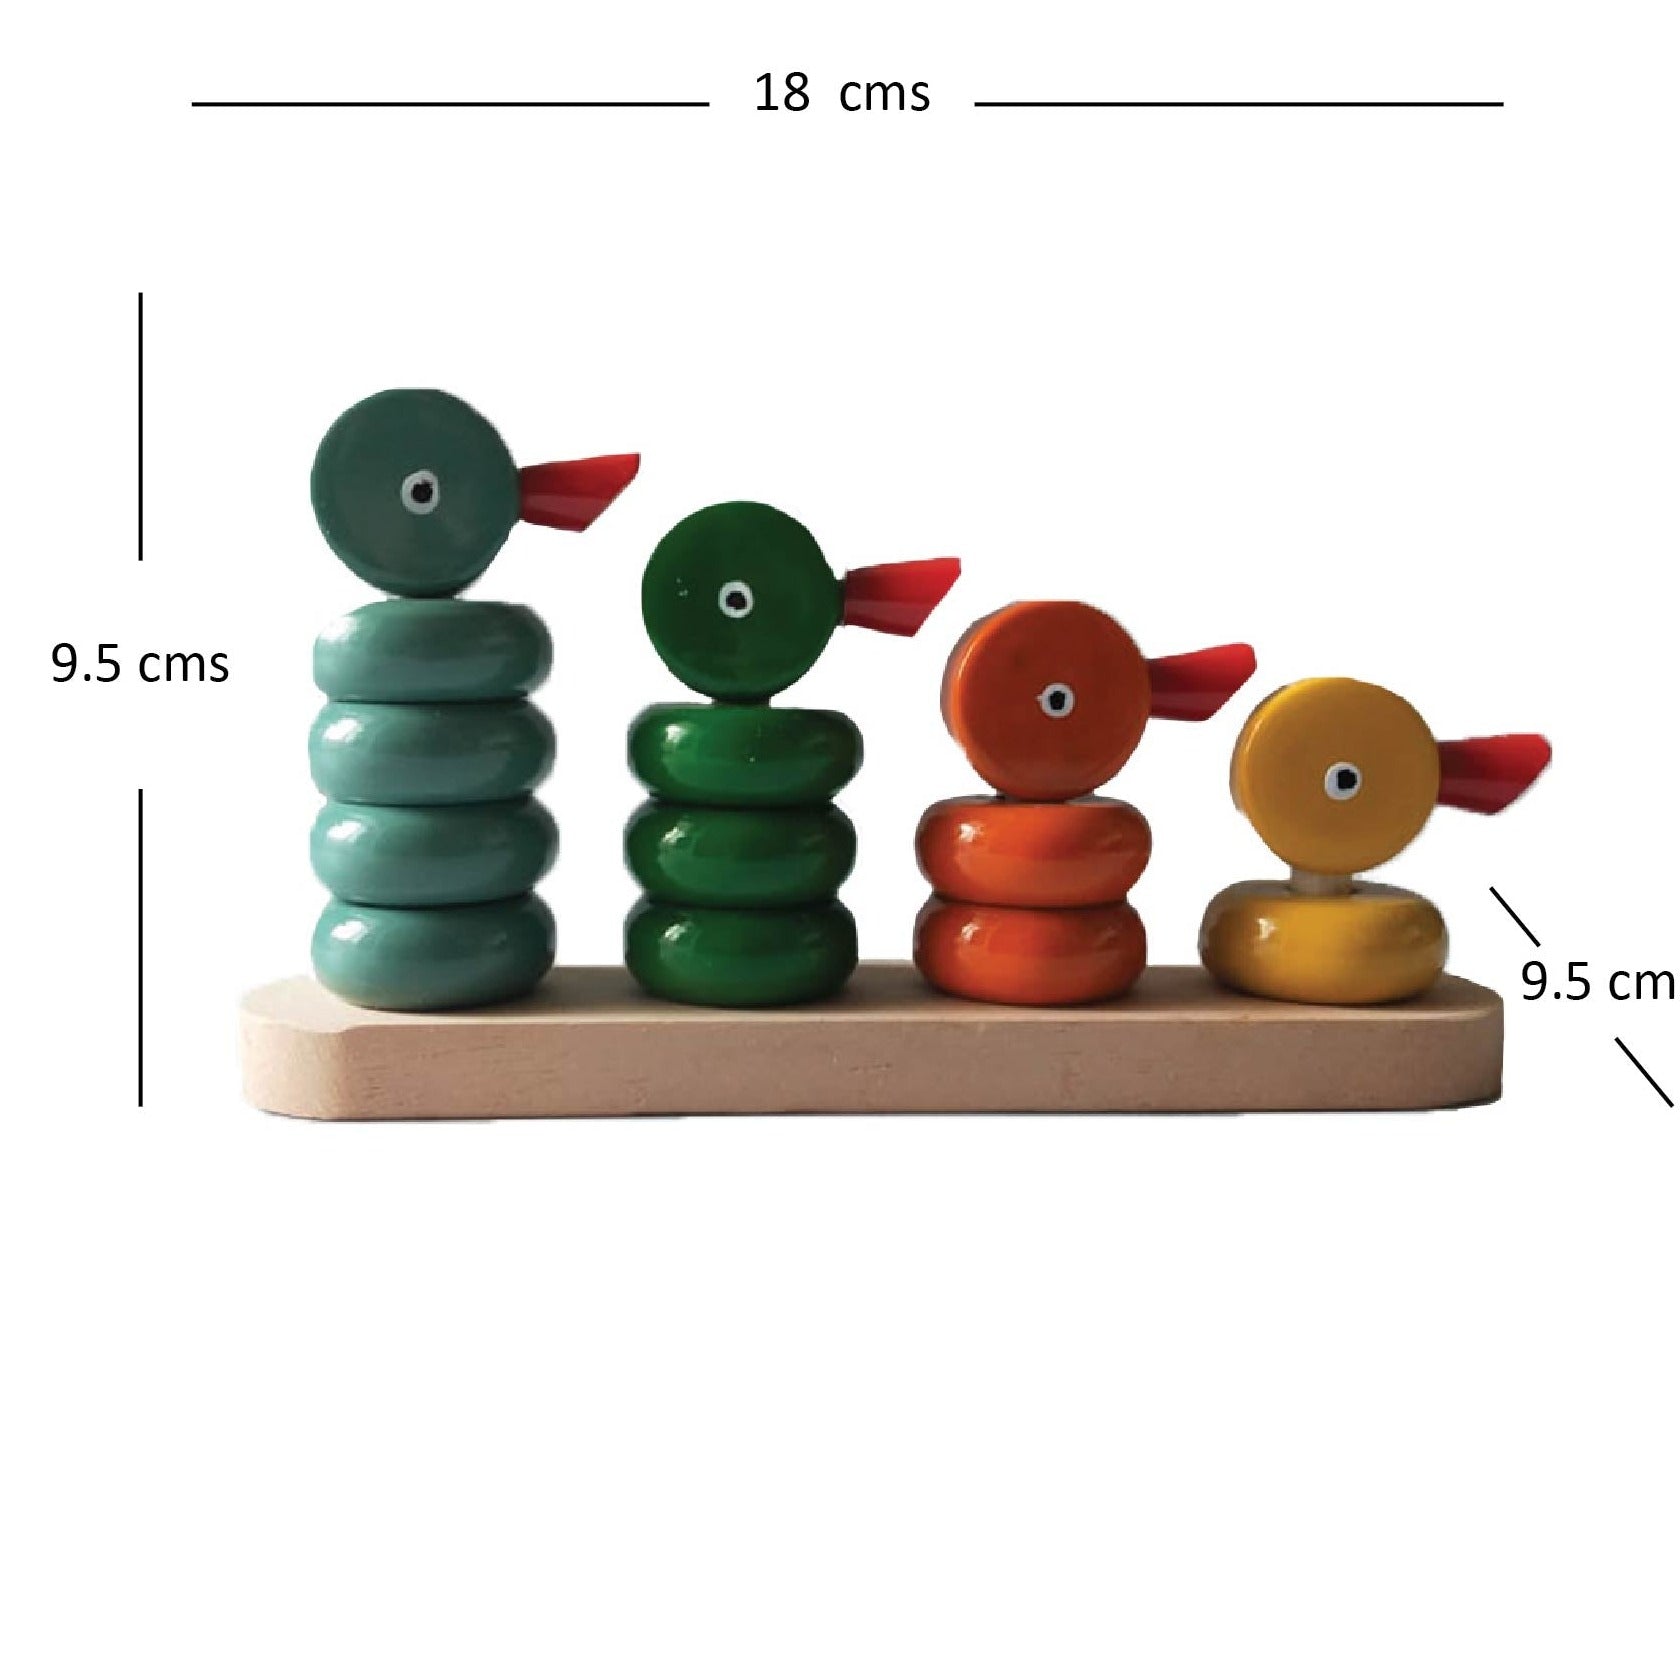 a wooden toy duck and duckling stacking on top of each other